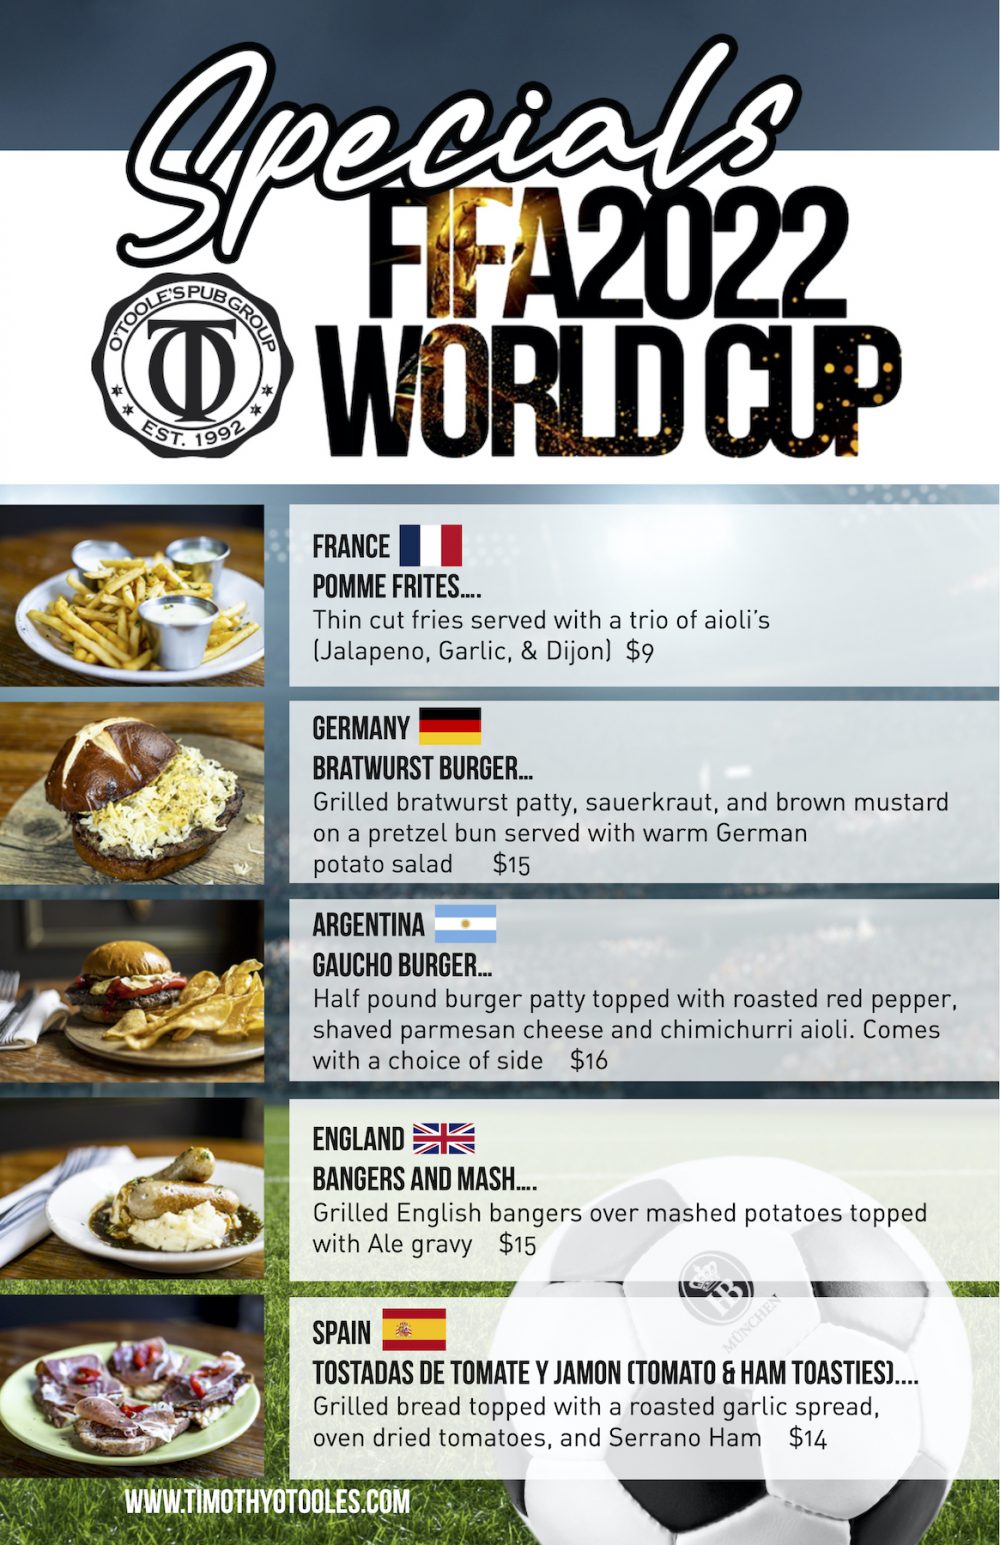 World Cup Specials Poster 2022